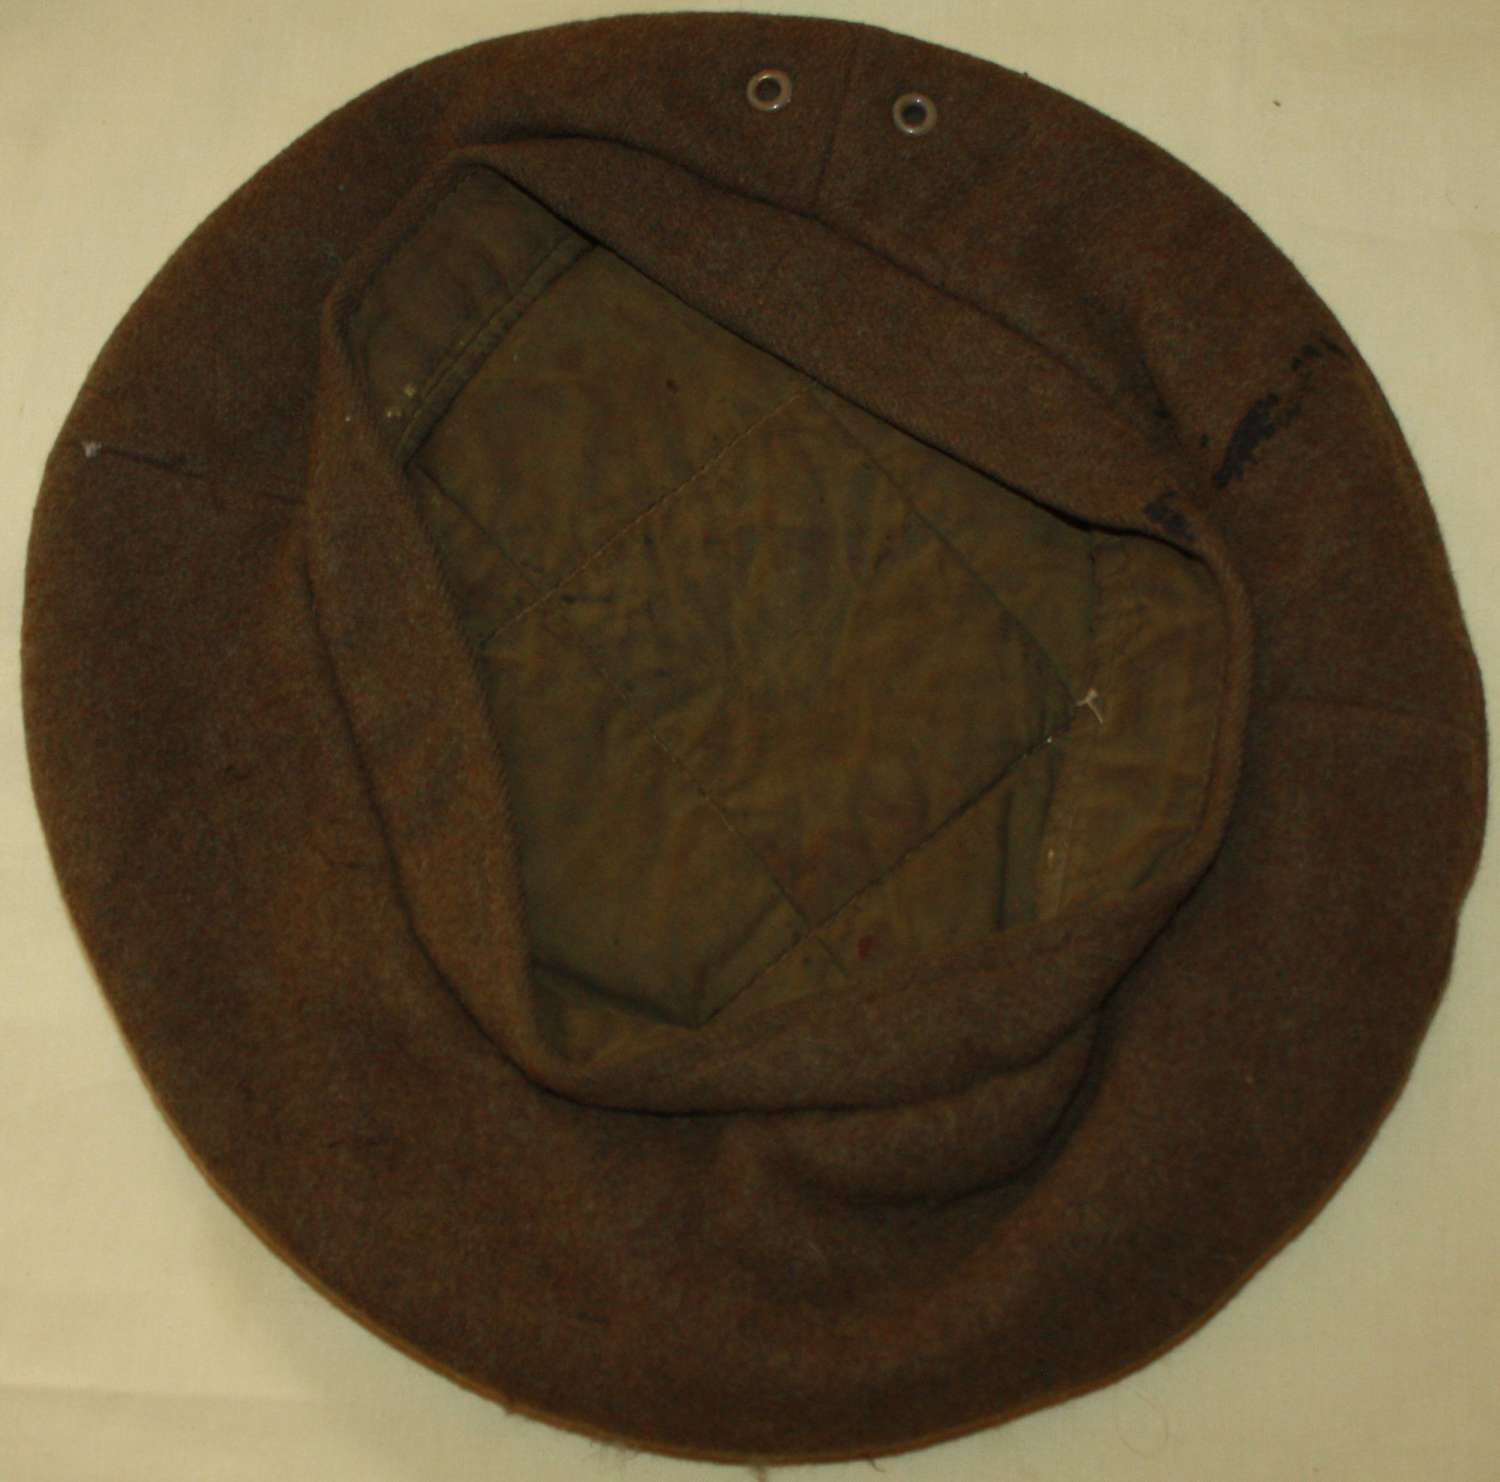 A GOOD USED WWII GS CAP SIZE IS A 6 3/4 APROX